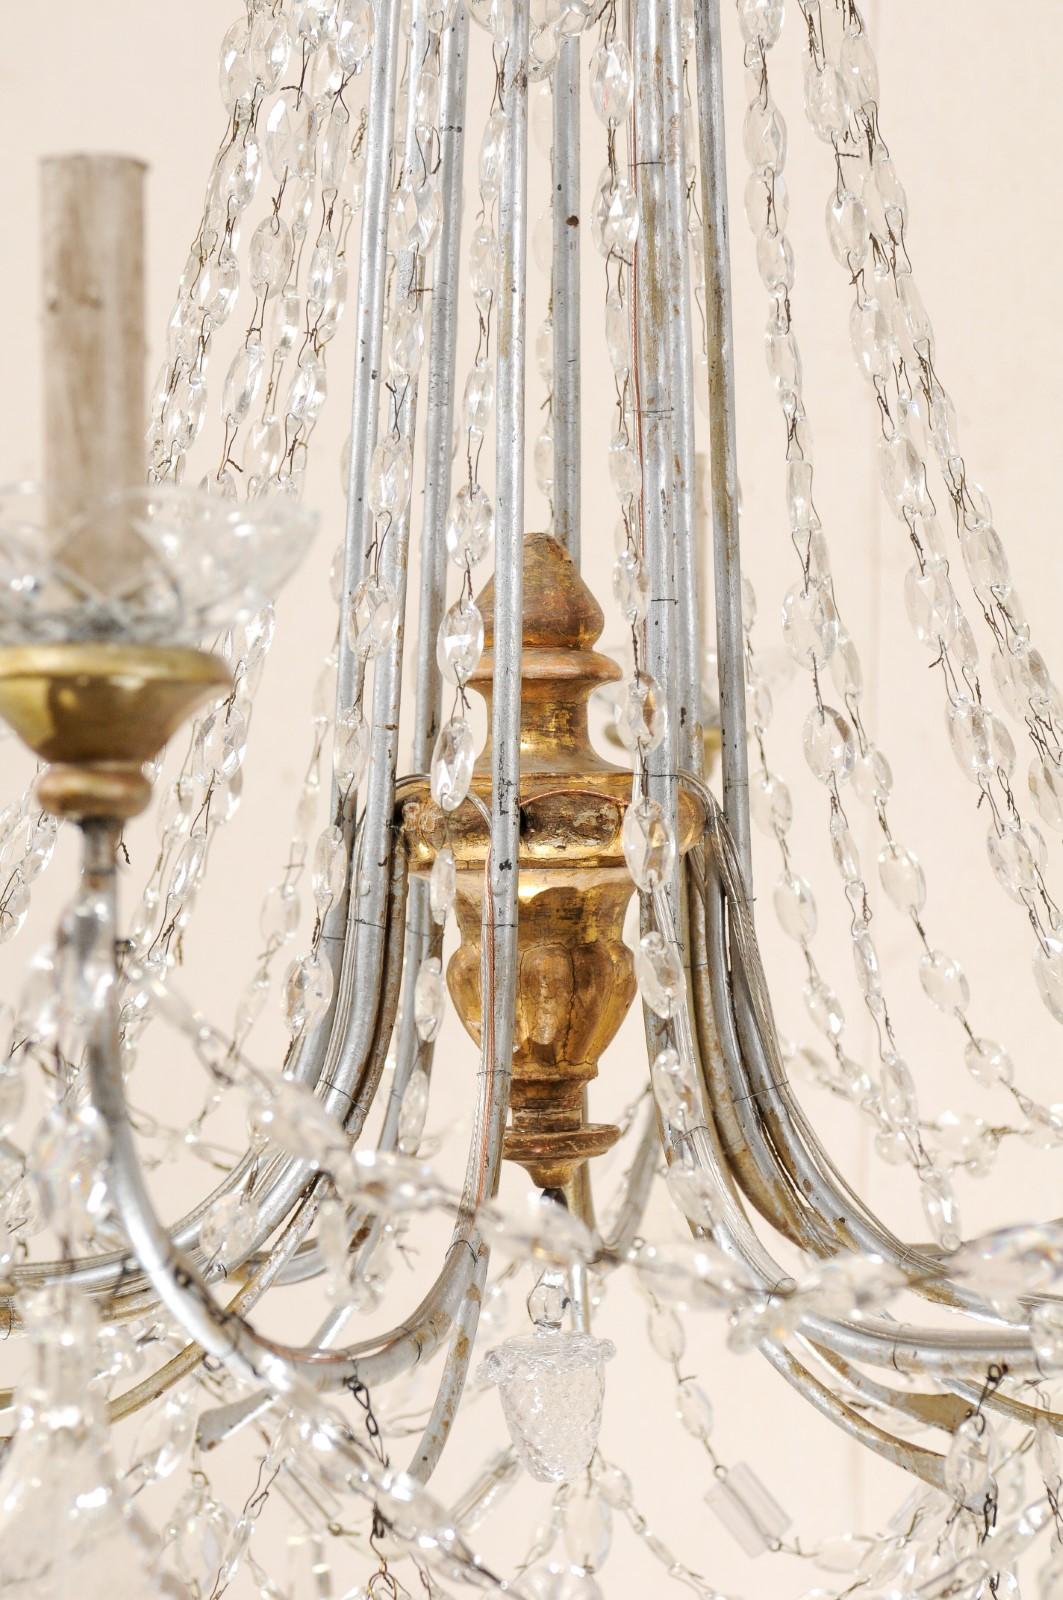 Metal Italian Crystal Eight-Light Chandelier w/ Two-Tiered Waterfall Top, Mid-20th C.